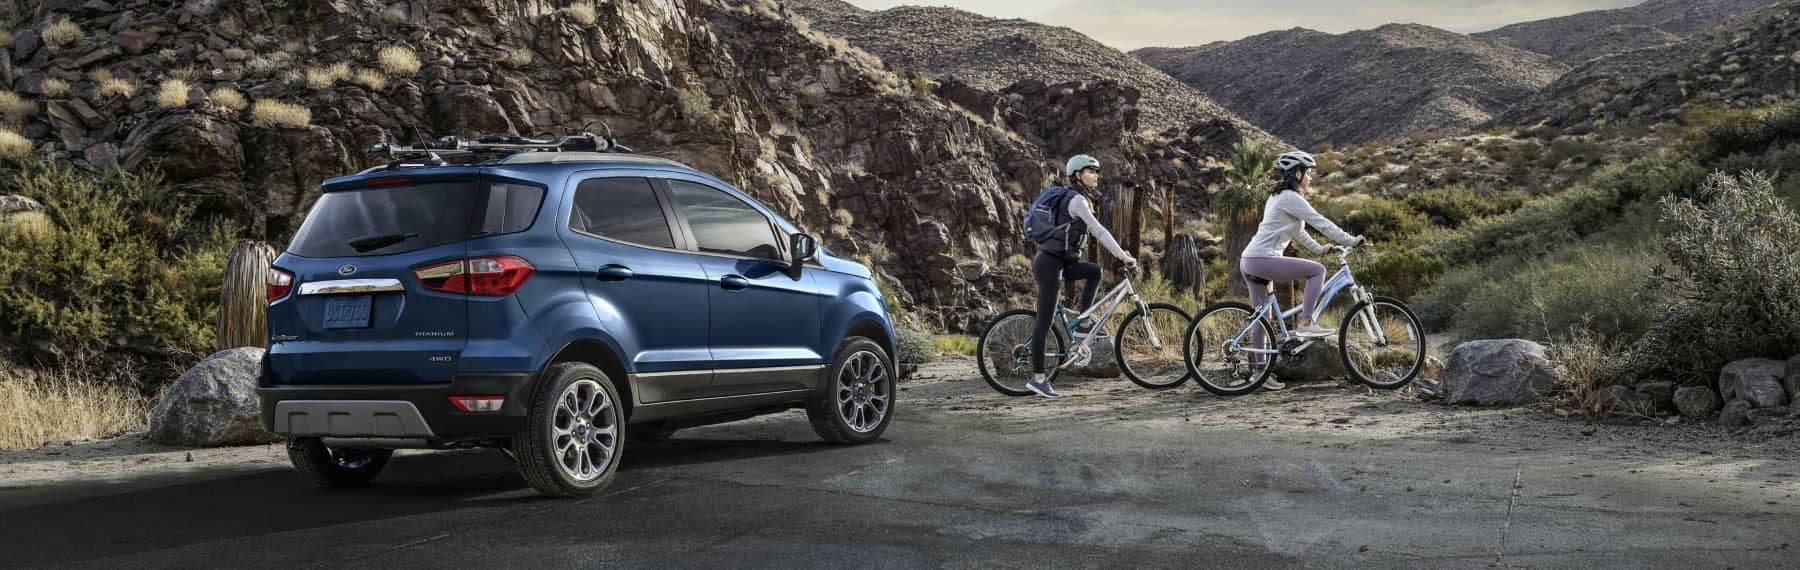 Two women on mountain bikes next to a parked Ford are preparing to ride a mountain trail